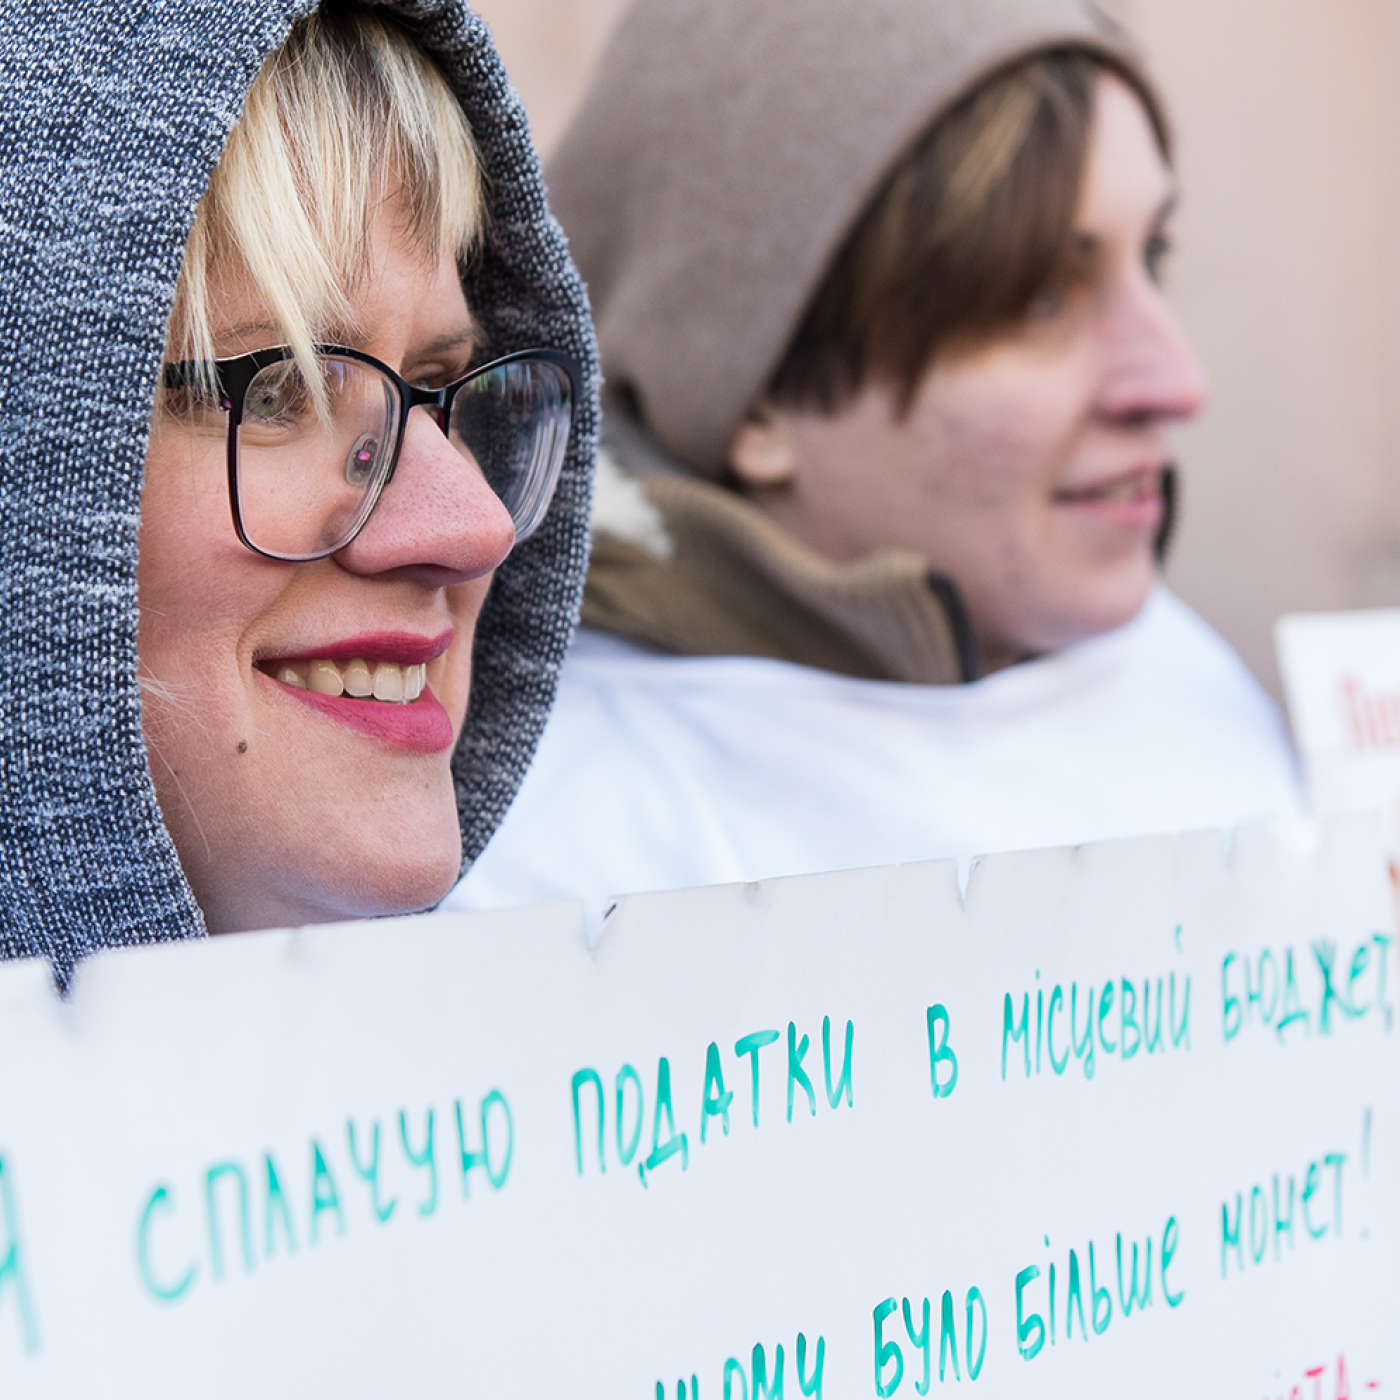 Several of IFES’ partner organizations in Ukraine organized an “Invisible Voters” event in March 2018 to raise awareness of internally displaced persons’ challenges among policymakers and the general public.